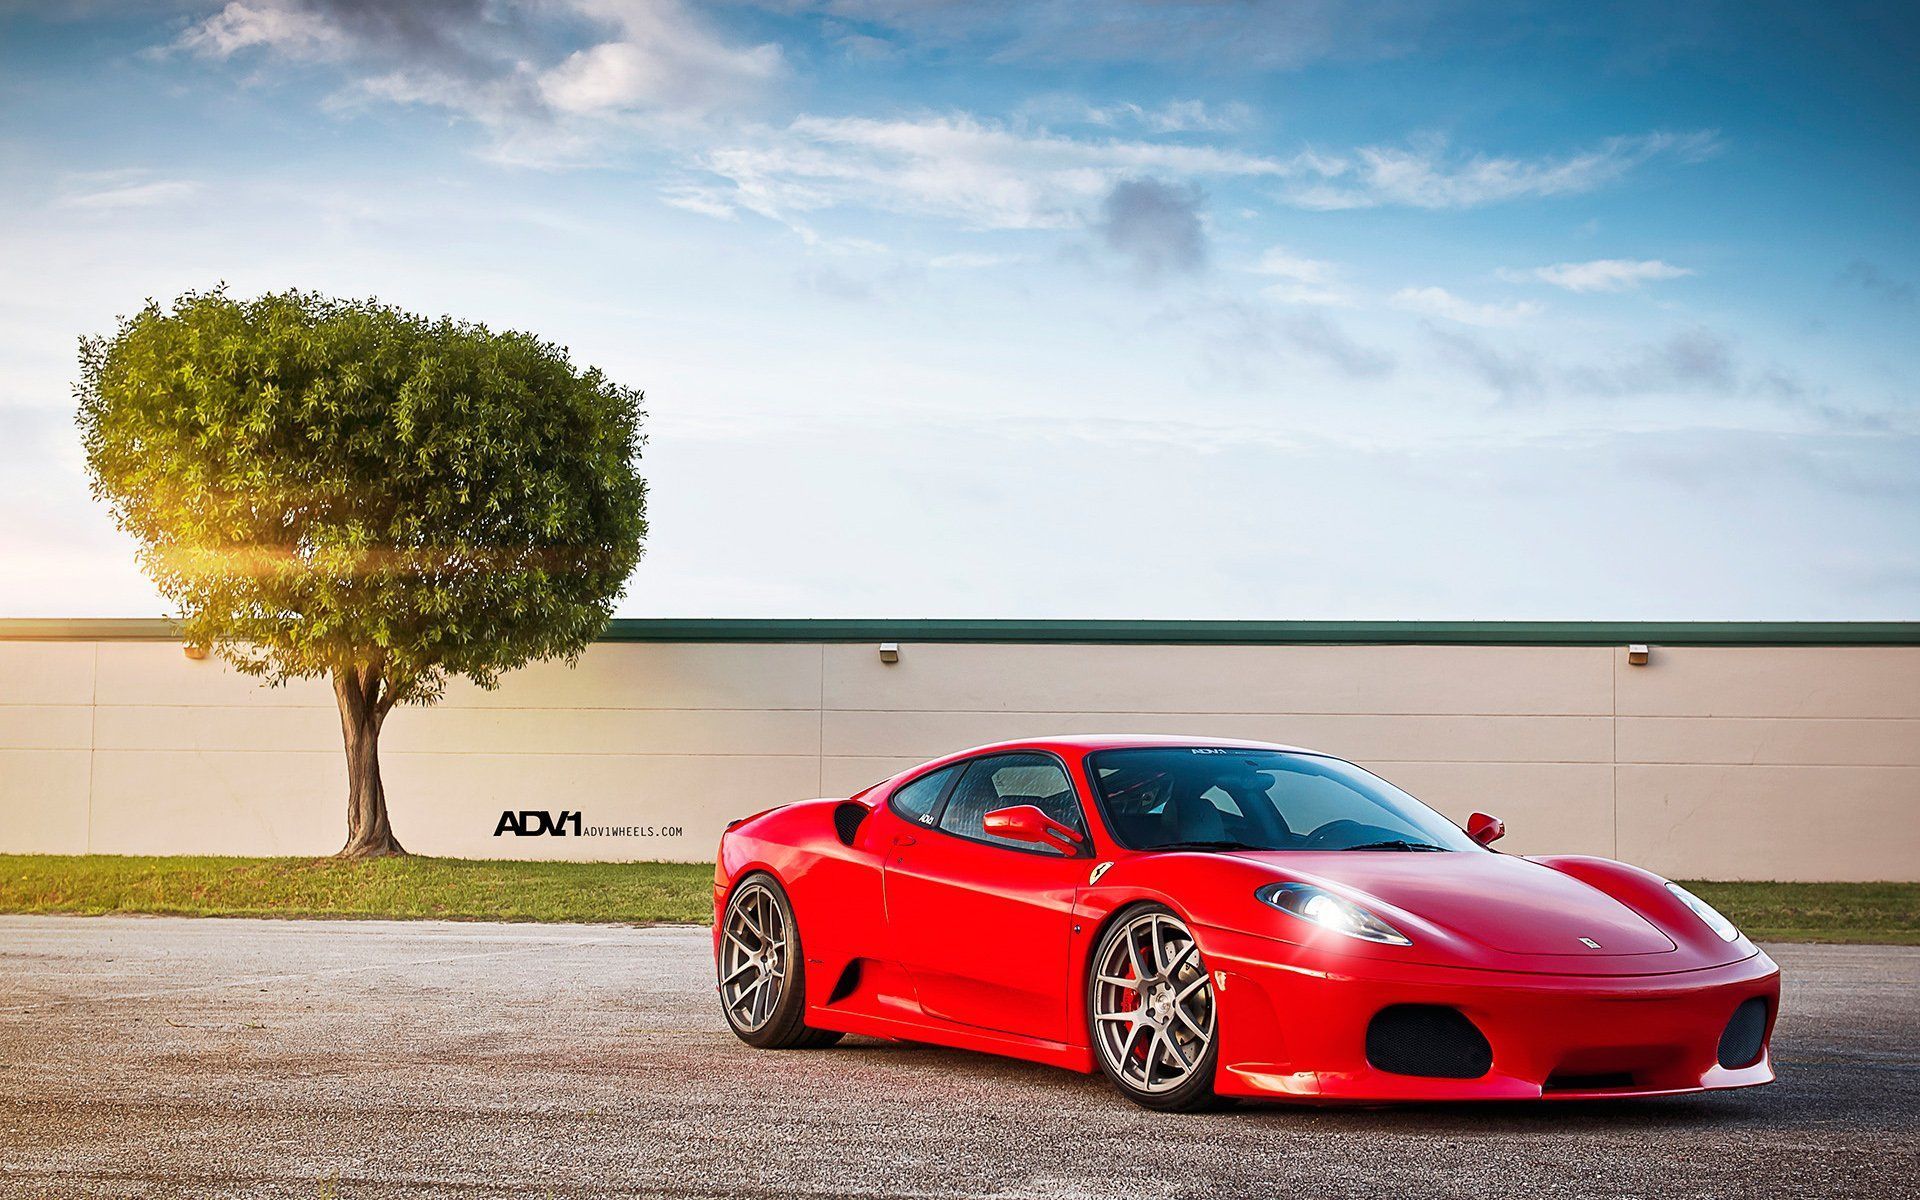 Coolest Collection of Ferrari Wallpaper & Backgrounds In HD